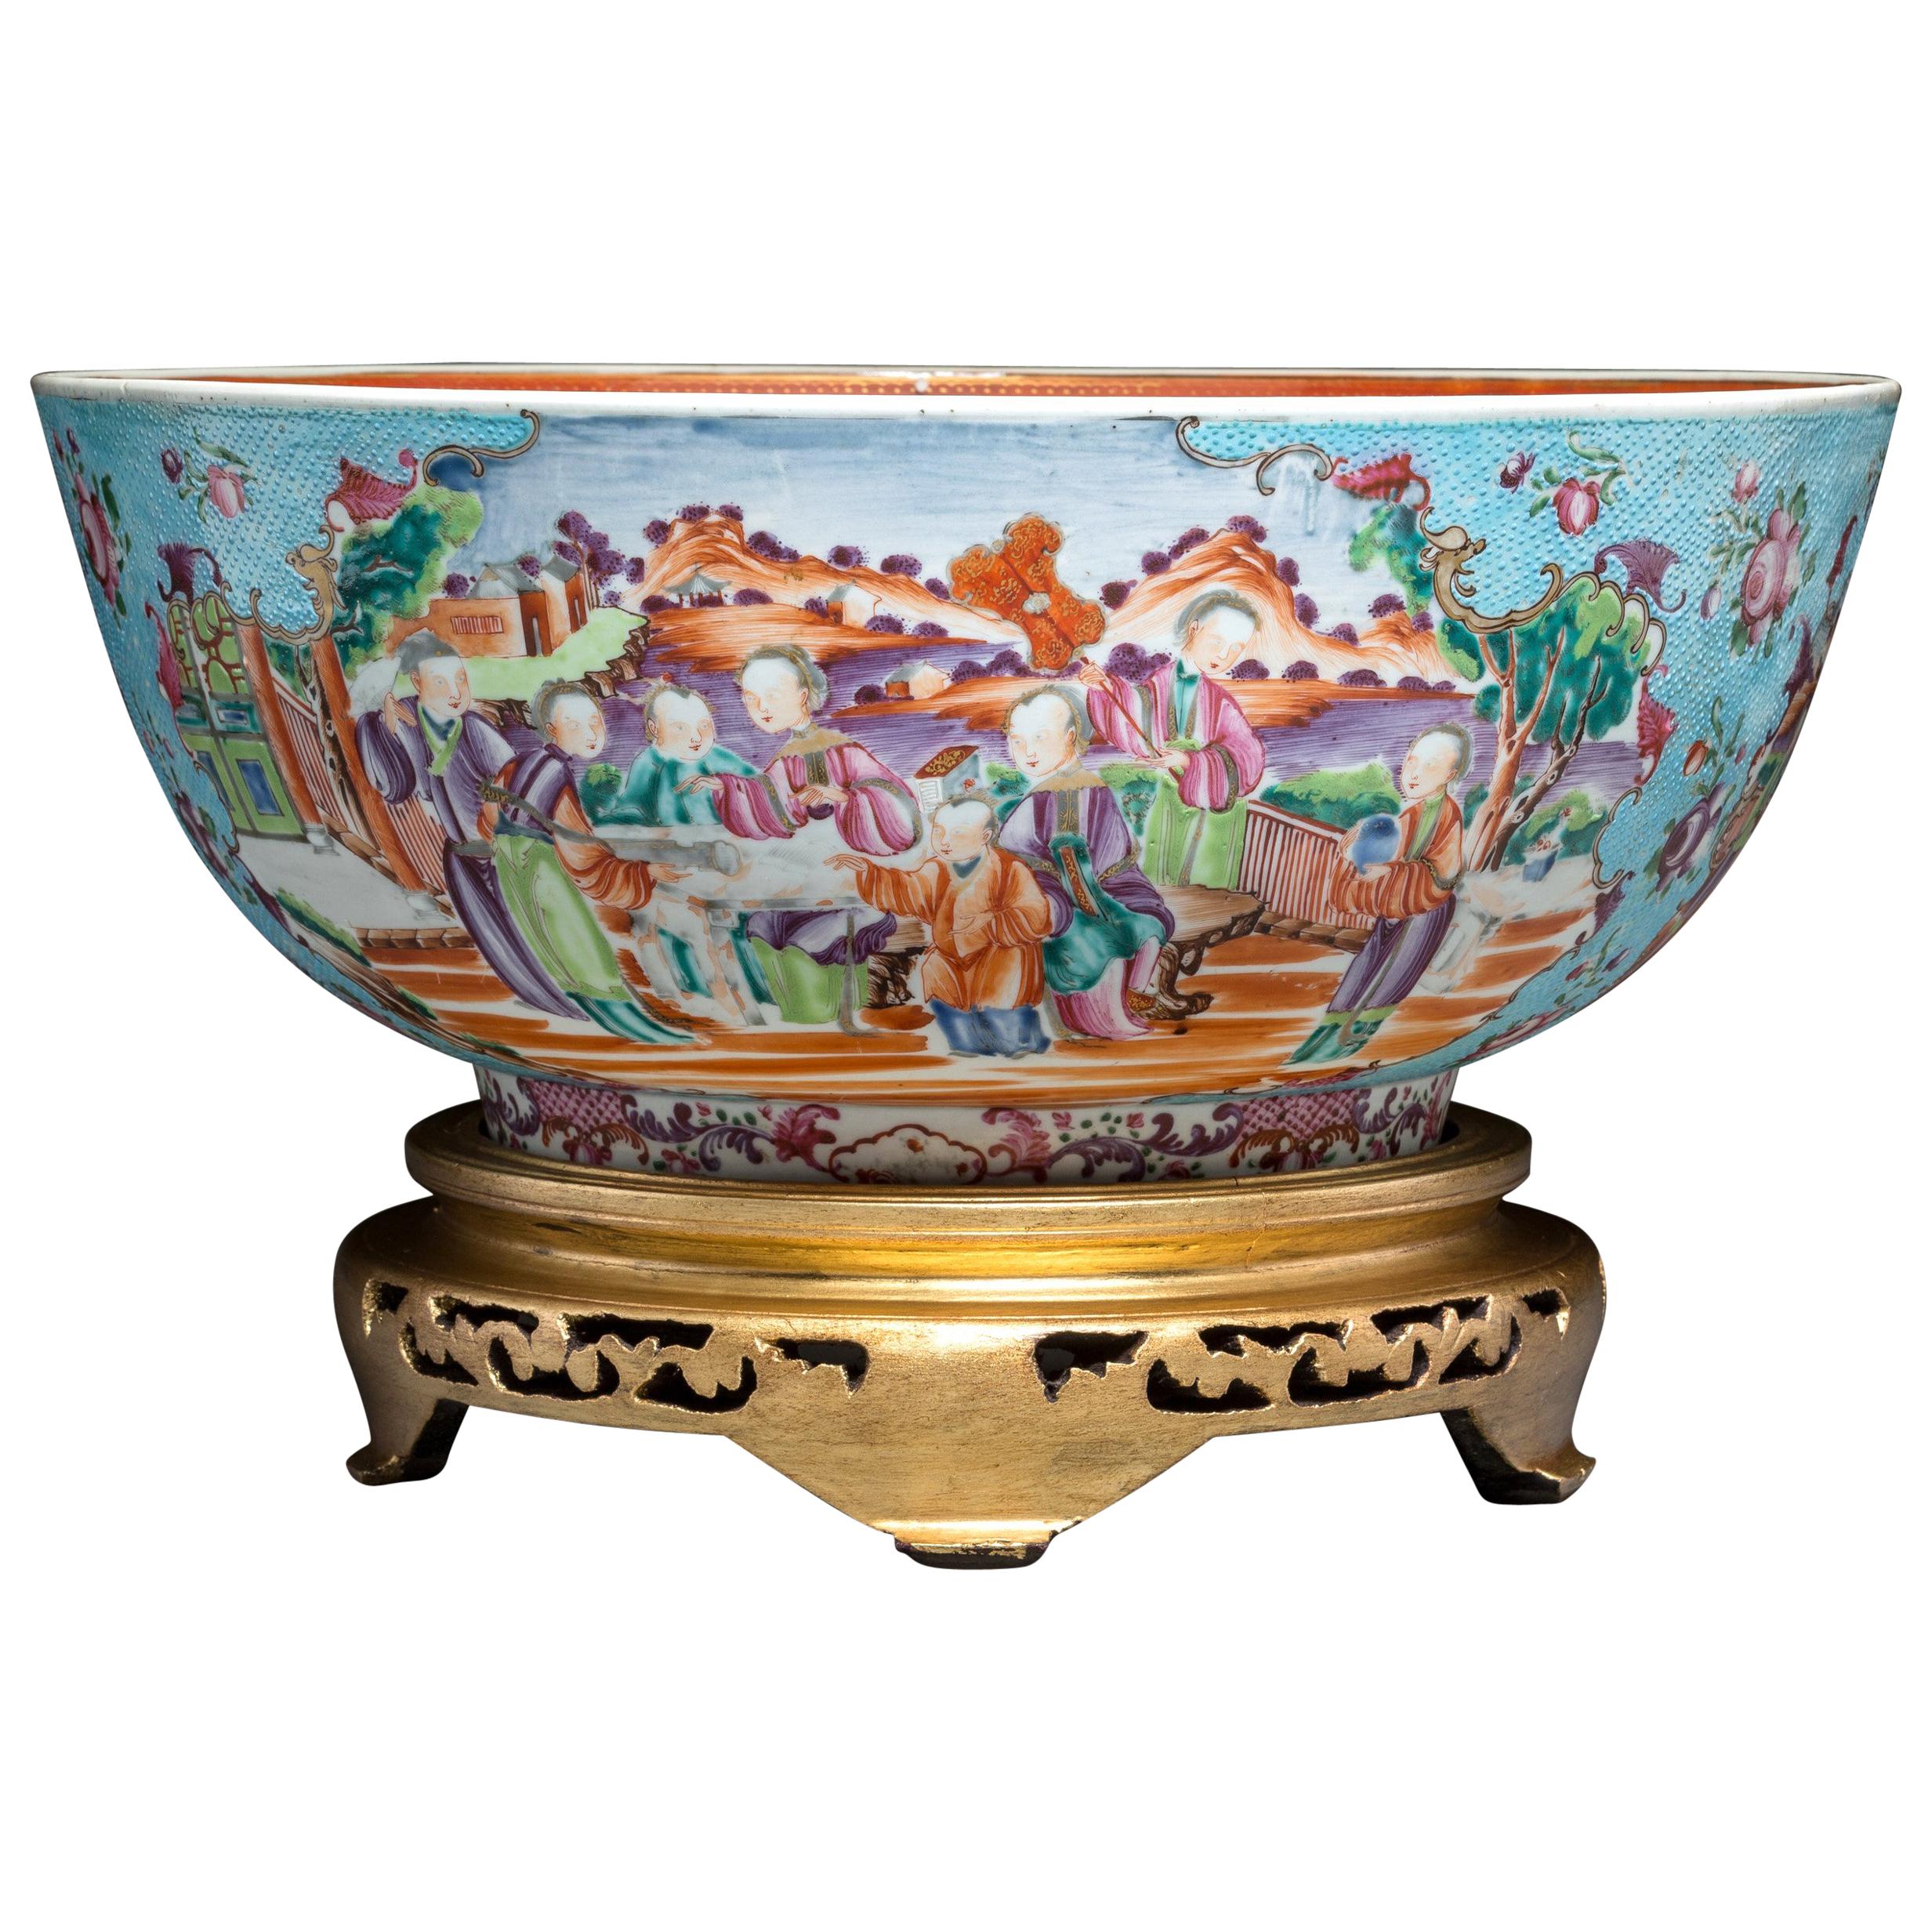 Chinese Export Porcelain Large Turquoise Punch Bowl, circa 1775-1785